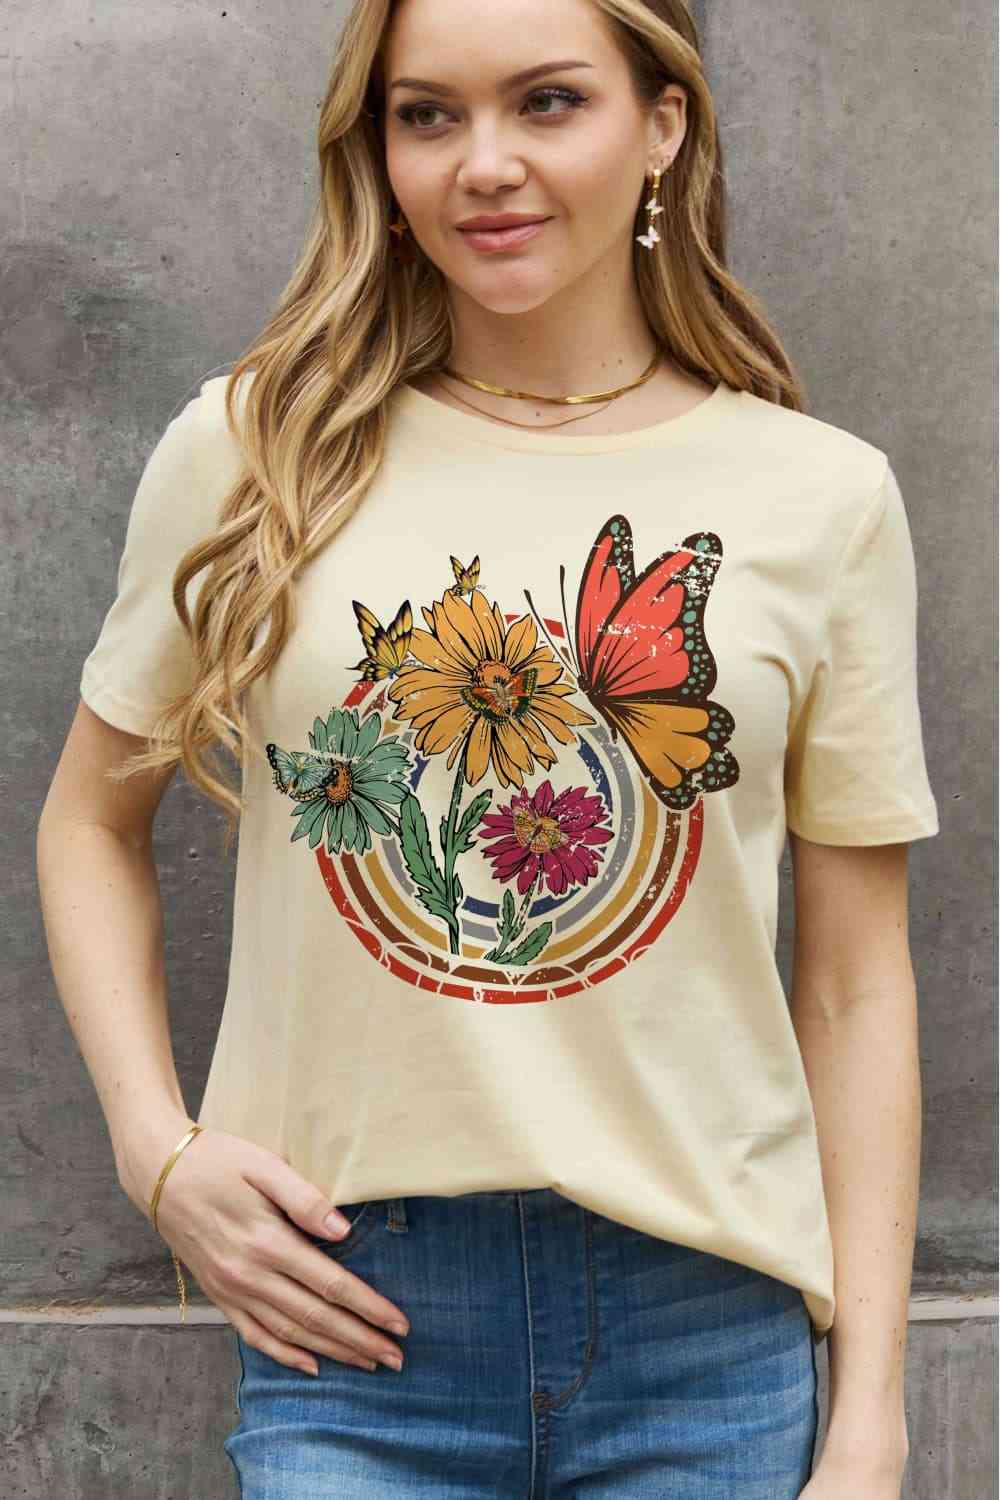 Flower & Butterfly Graphic Cotton Tee - T-Shirts - Shirts & Tops - 17 - 2024